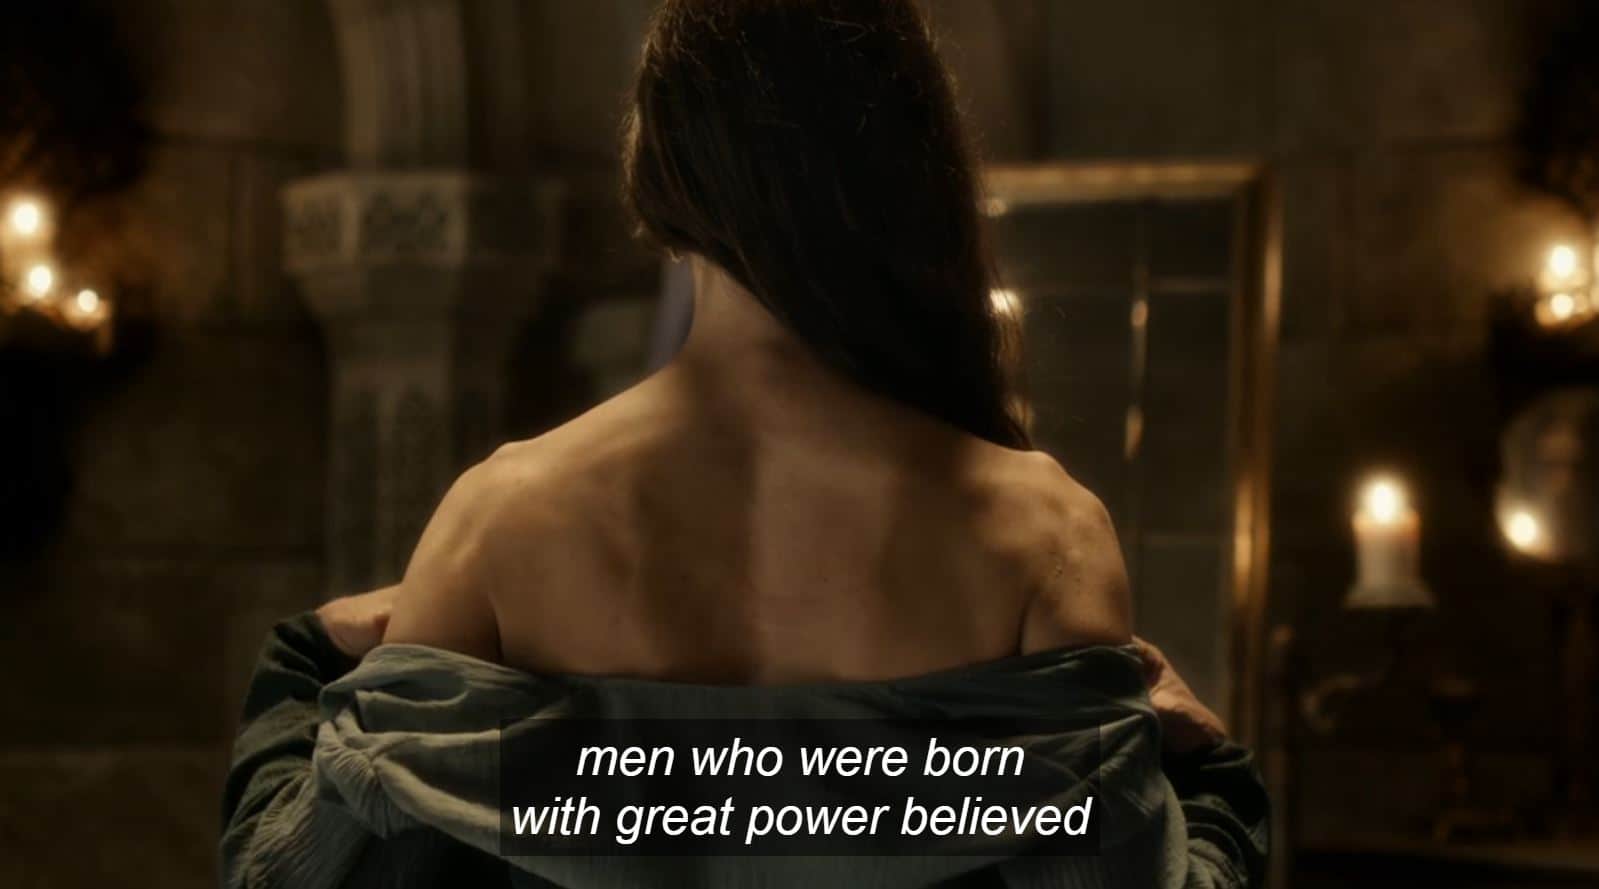 A shot of Moiraine from the back pulling on her shirt, with the text over it "men who were born with great power believed"